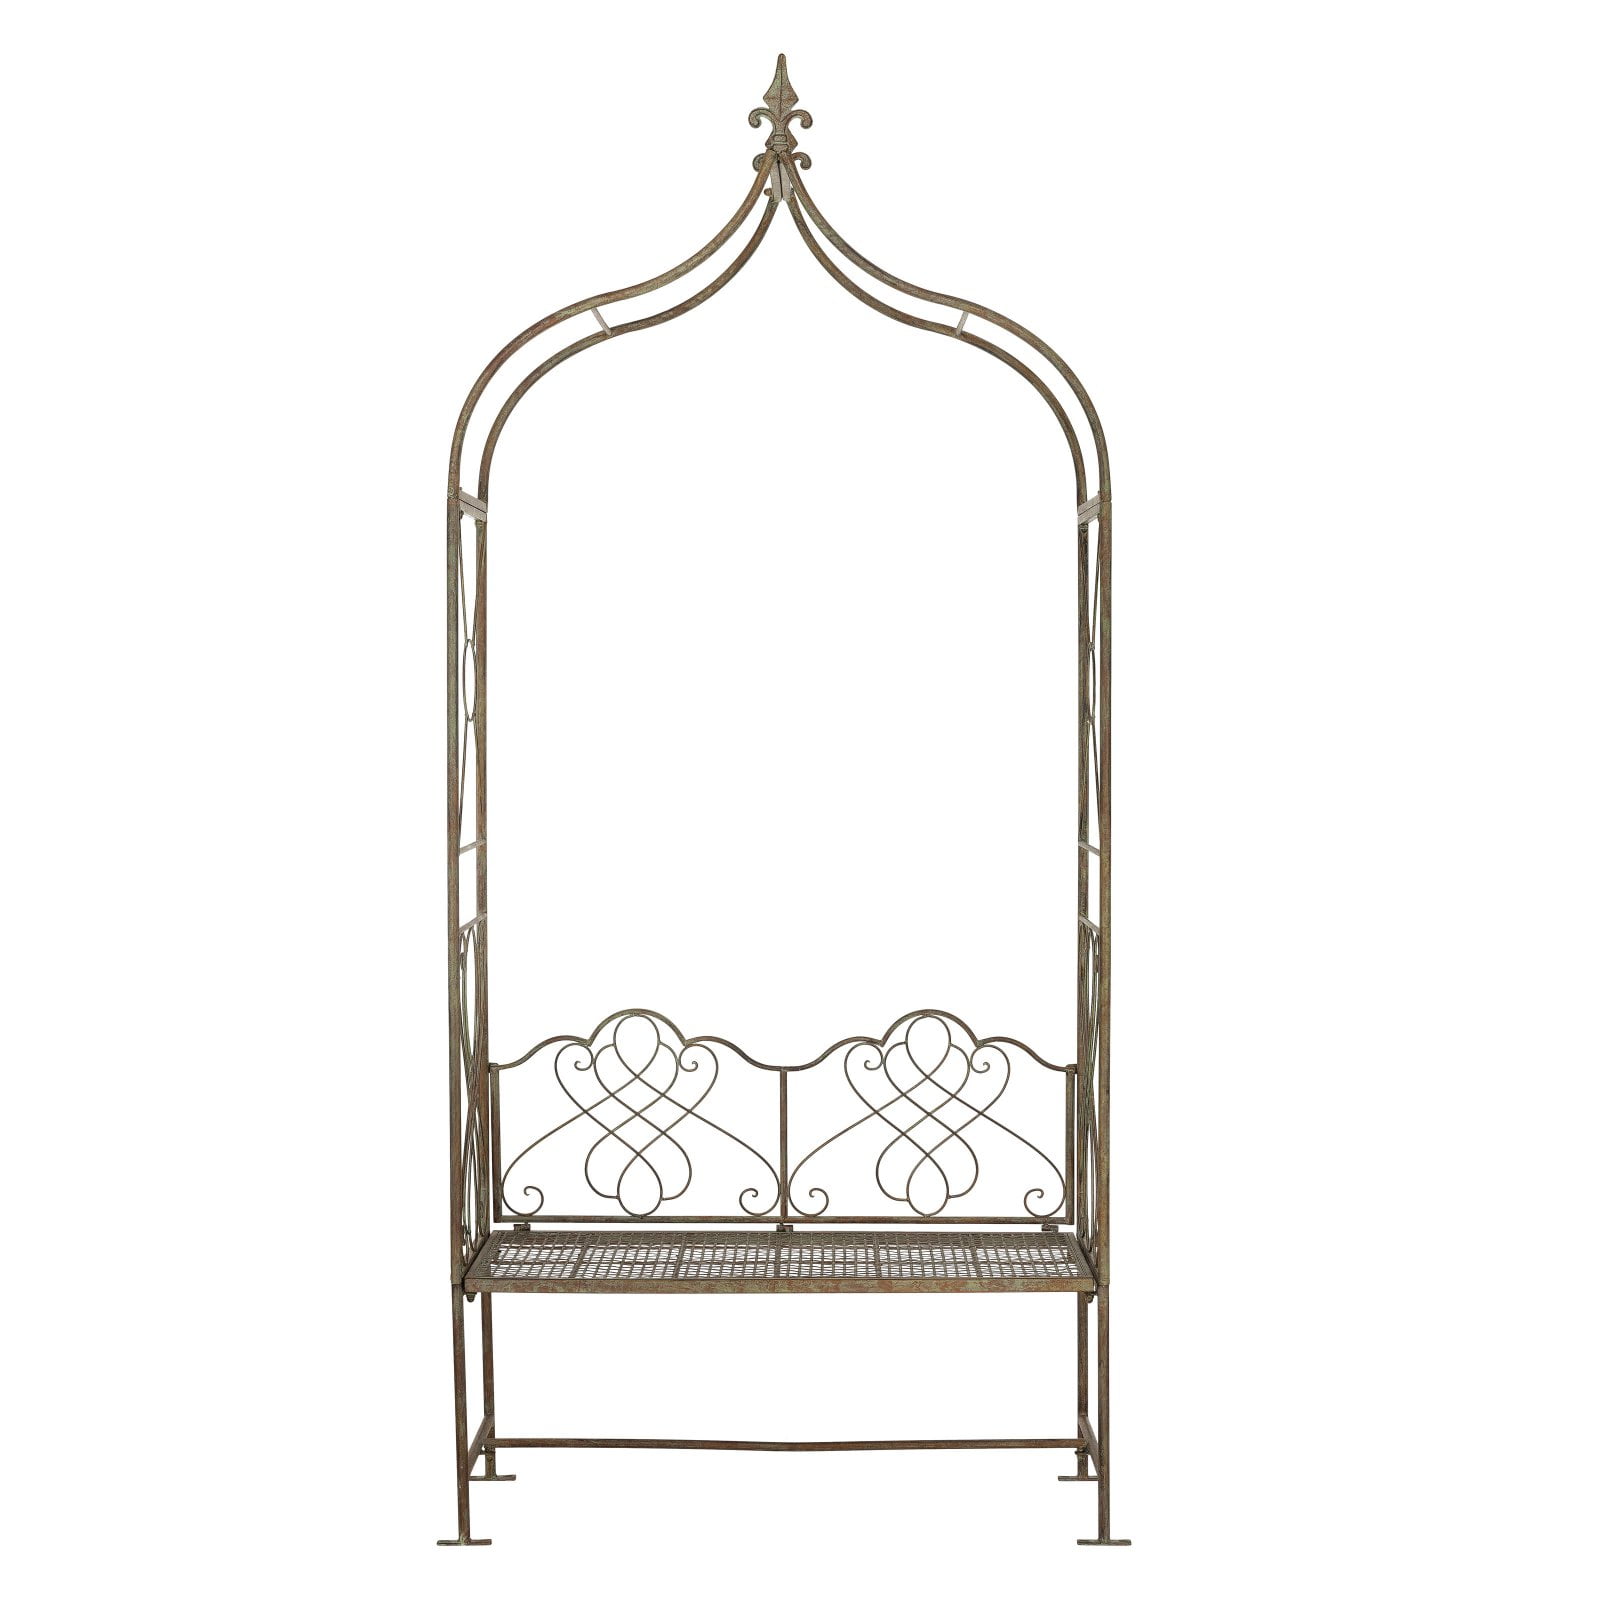 Wrought Iron Antique Mint Finish Details about    Arbor/ Garden Arch with Bench  95" High 